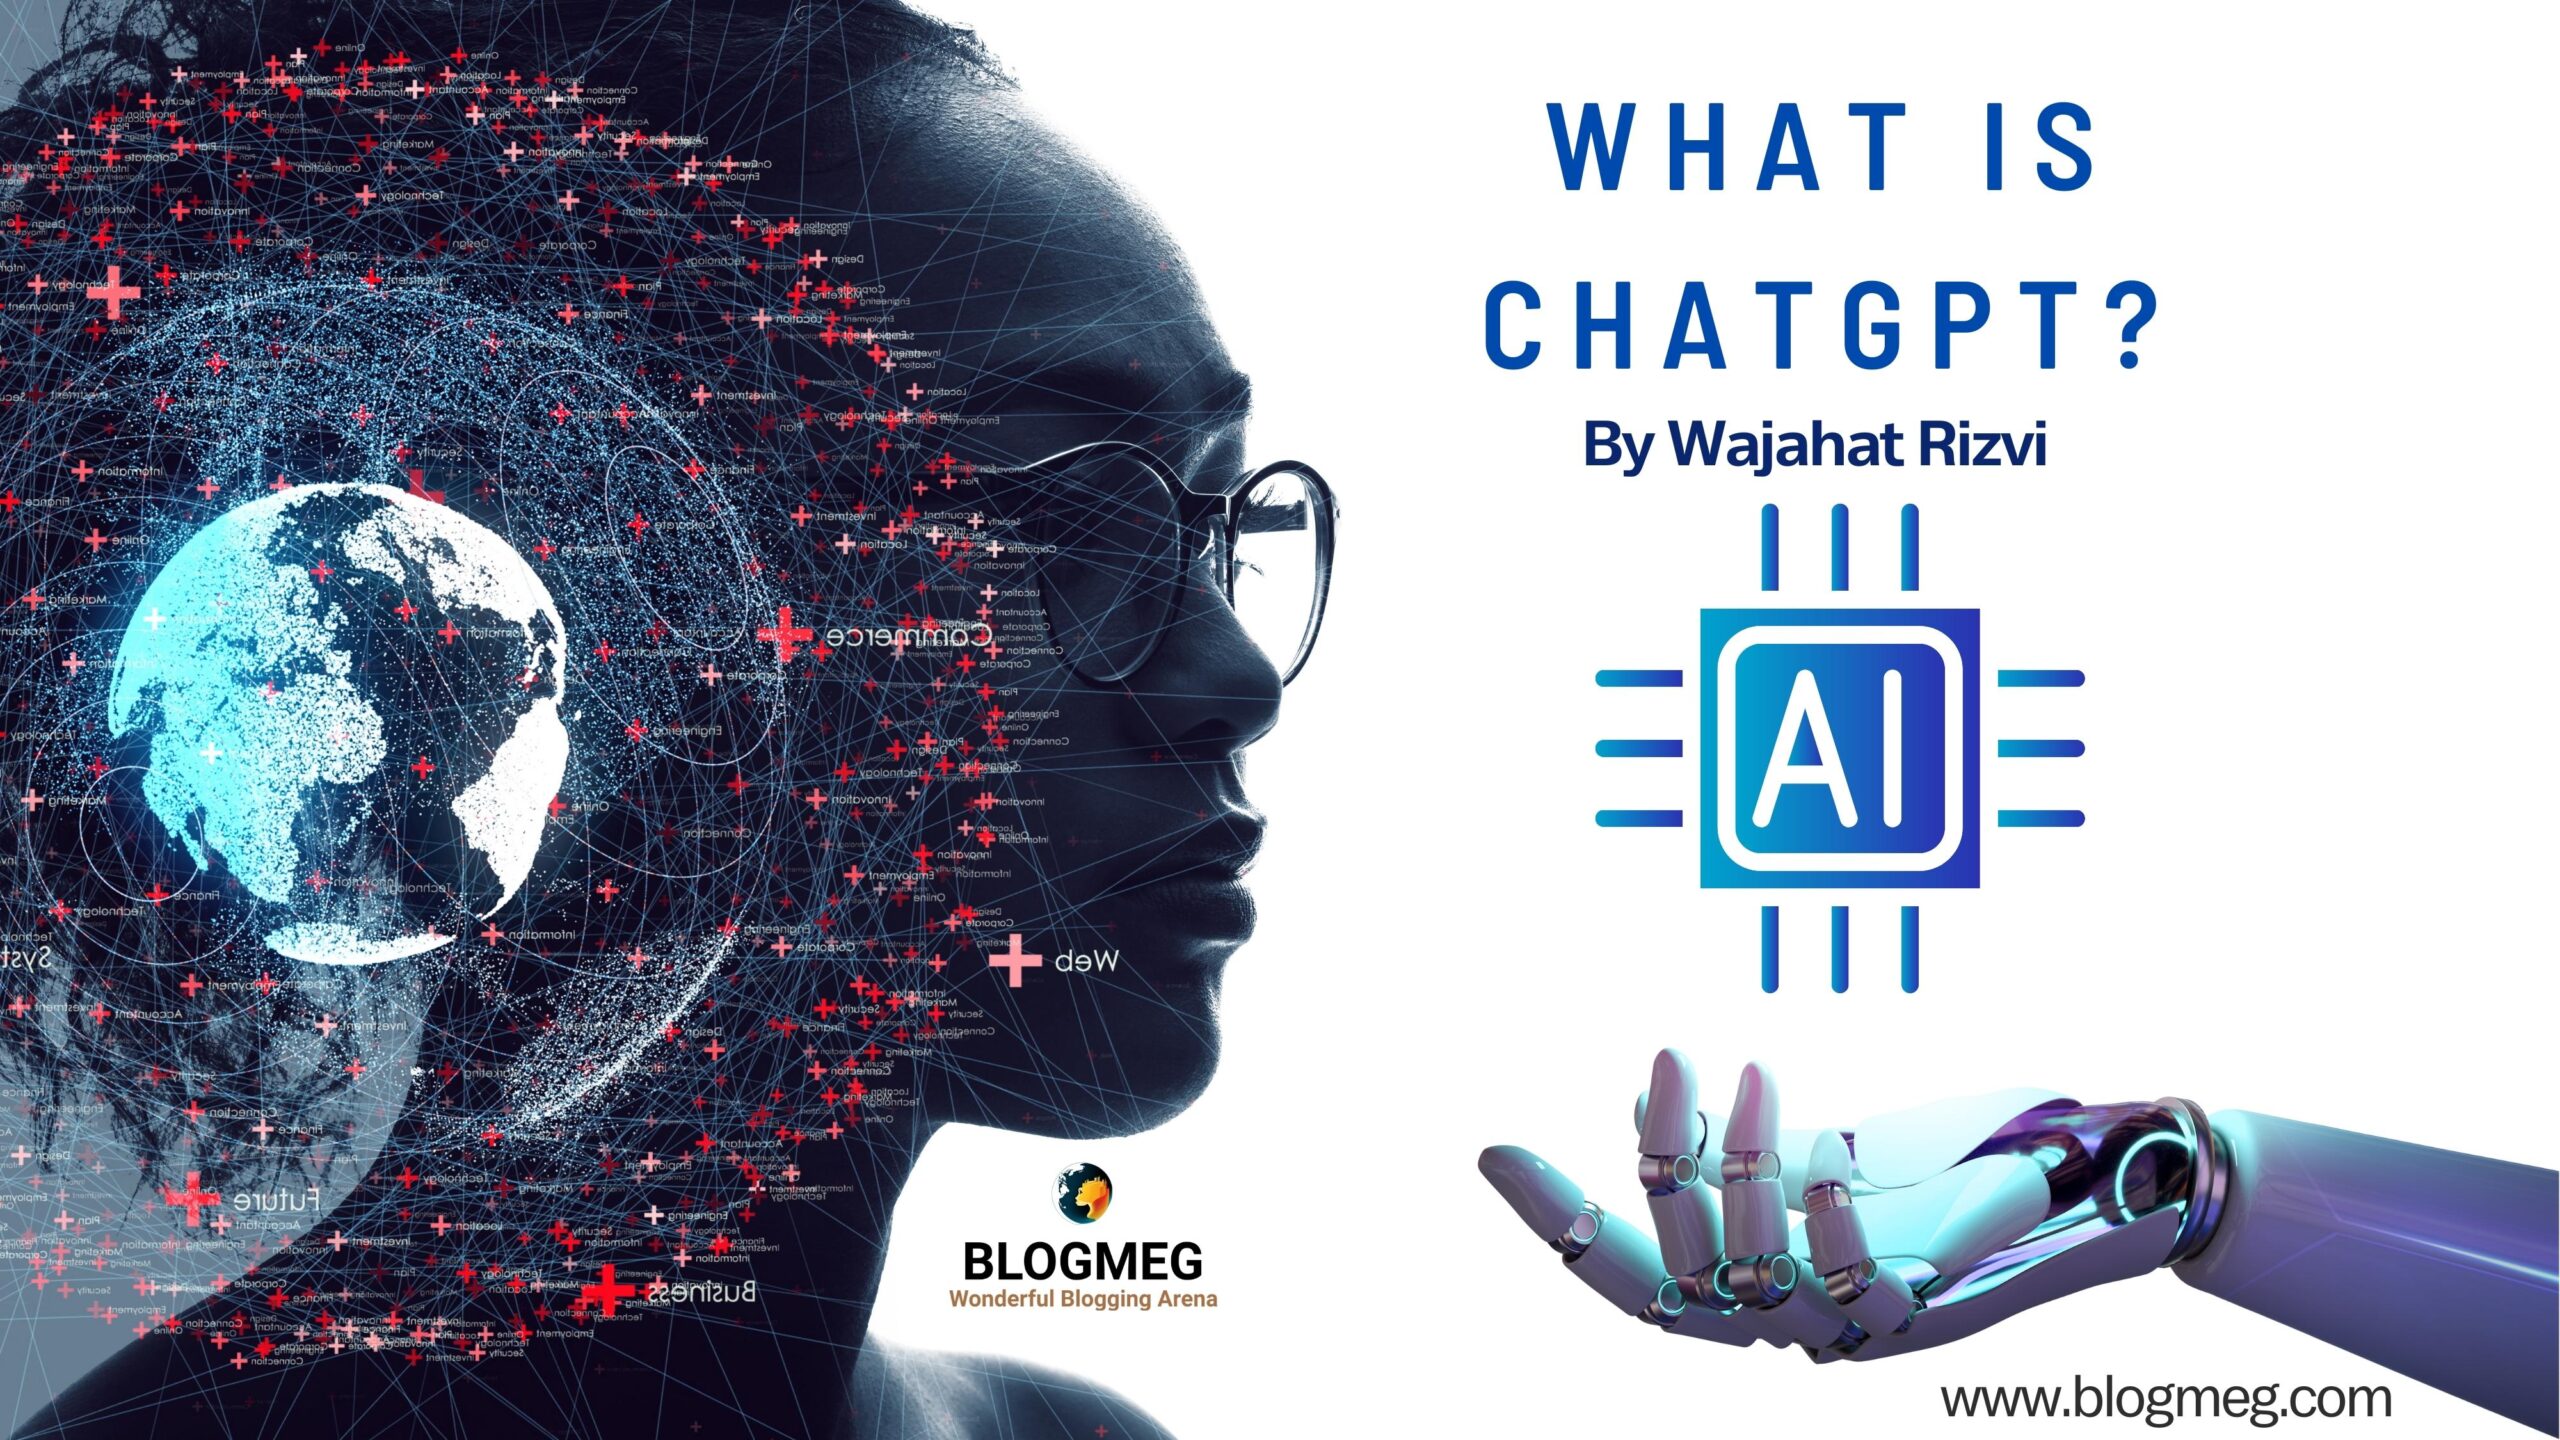 What is ChatGPT? And how can we use it?